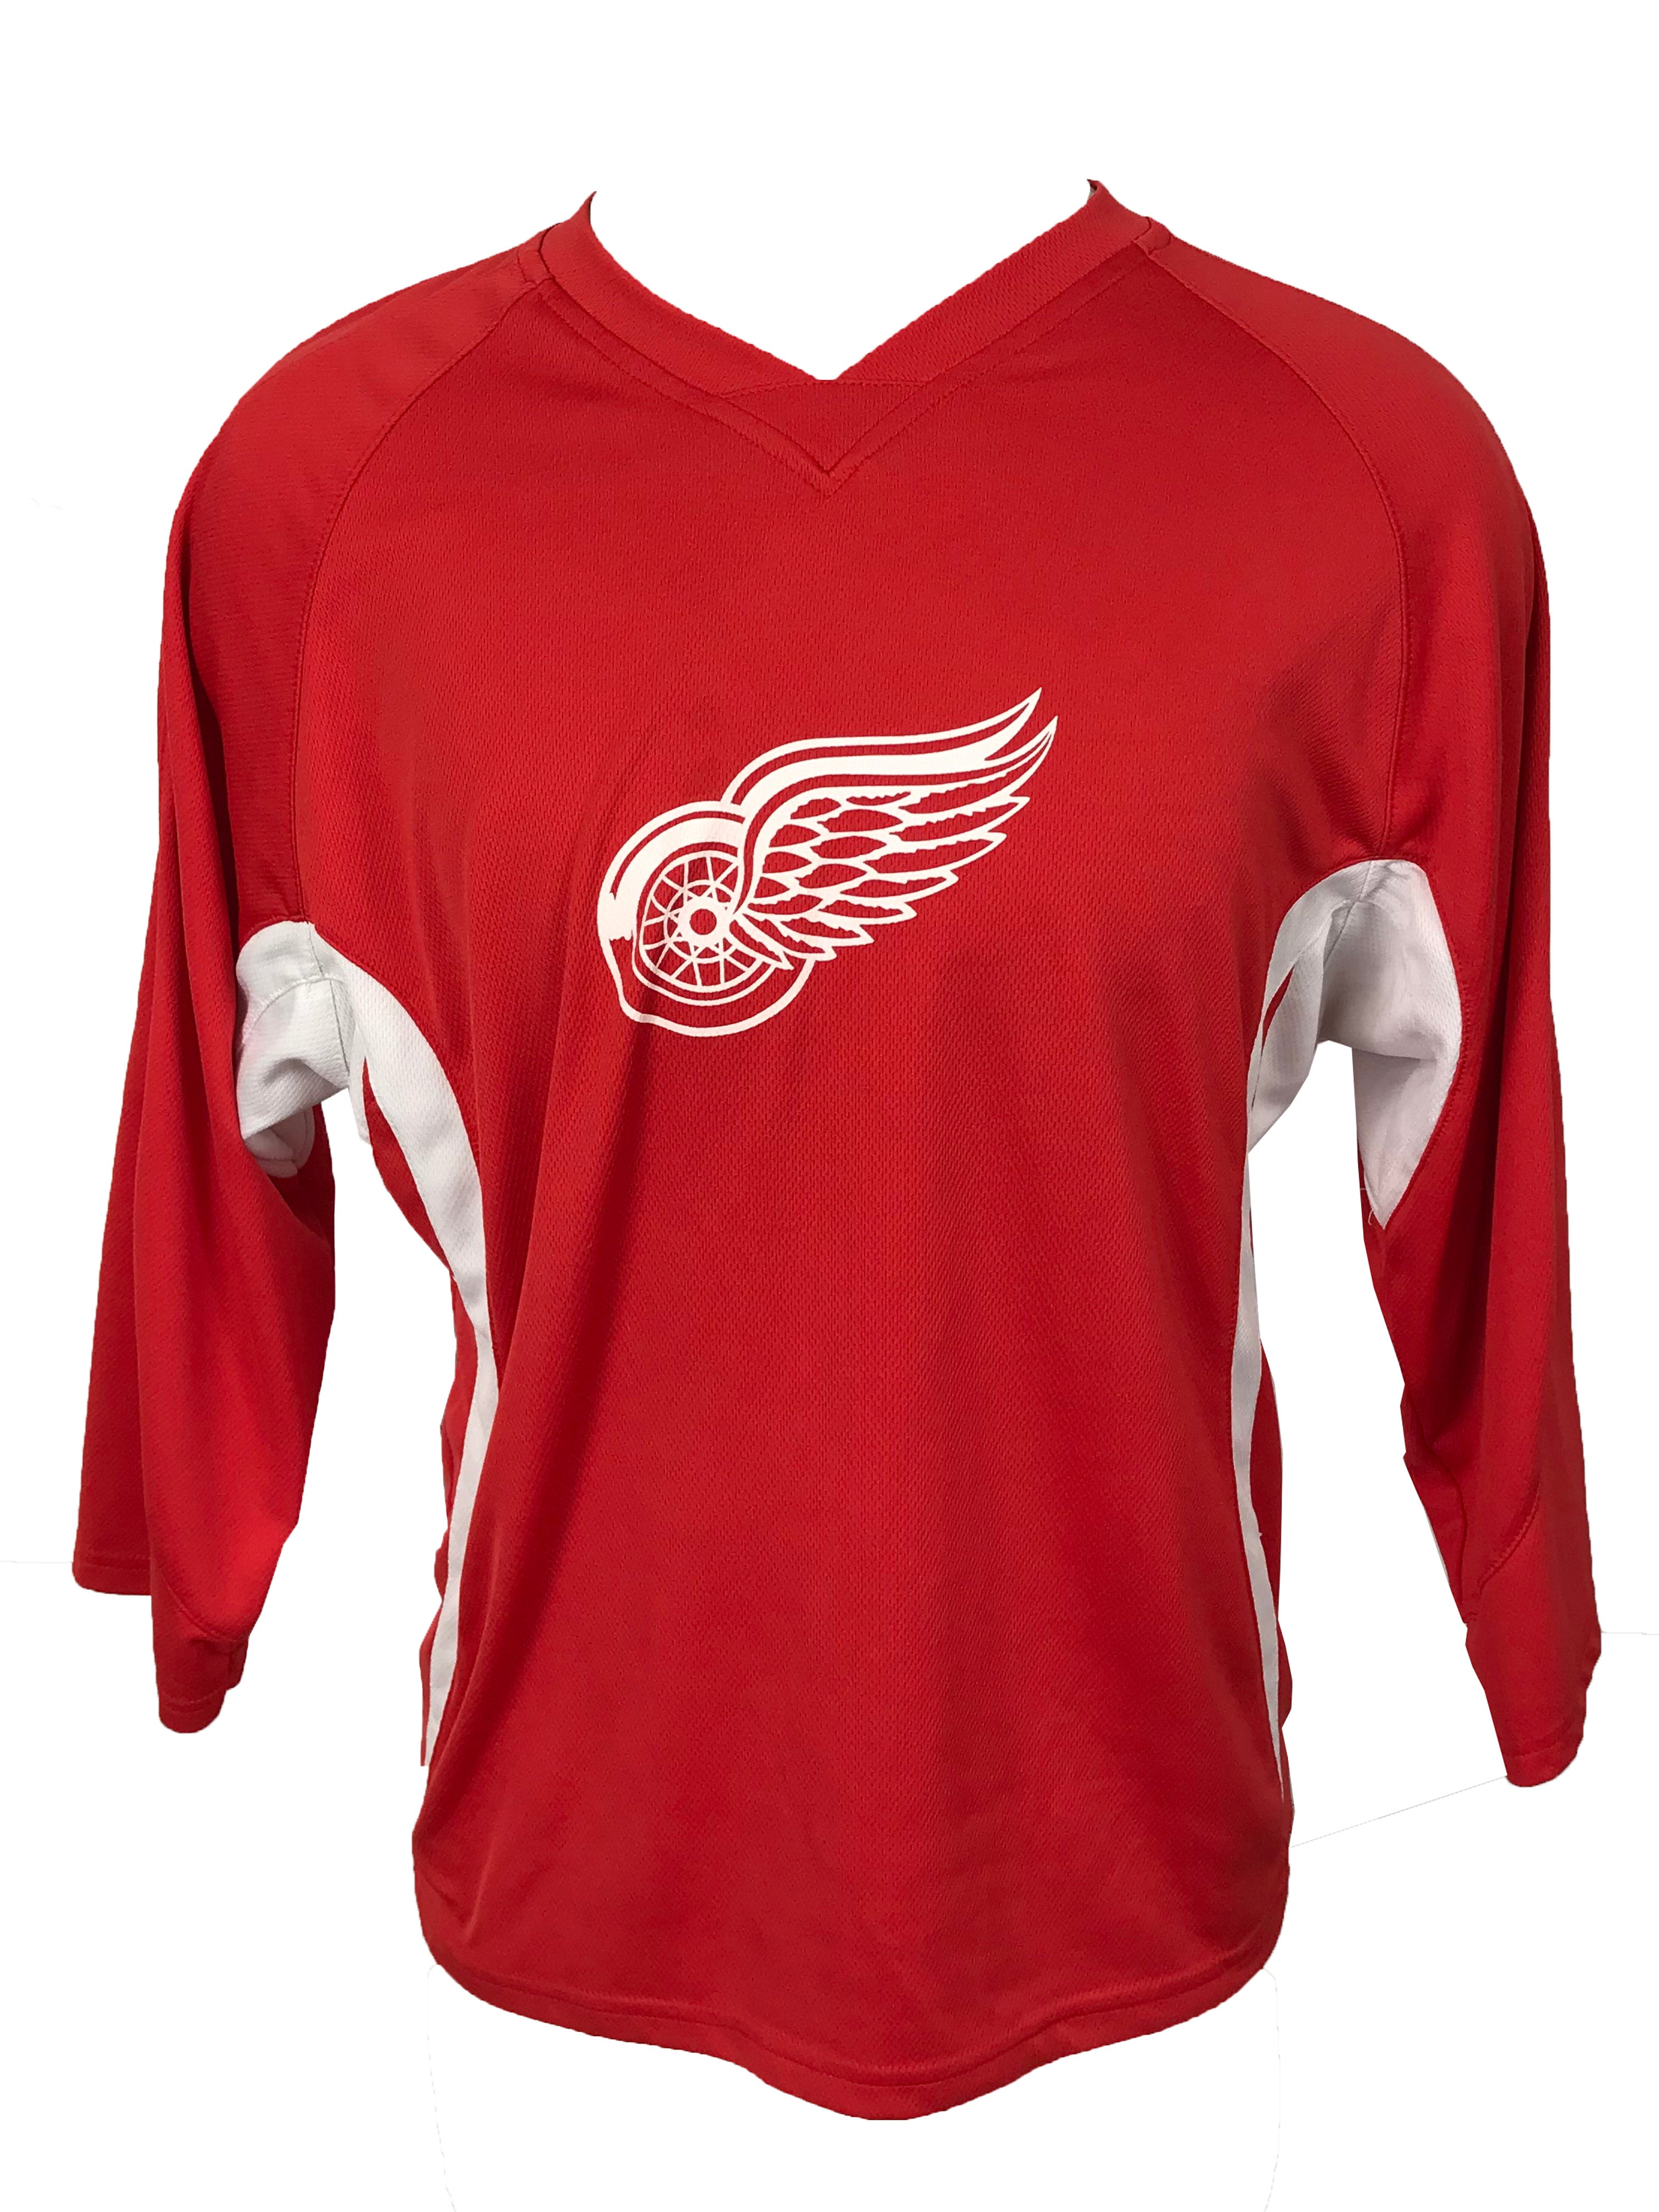 NHL Red Wings Jersey Kid's Size XL